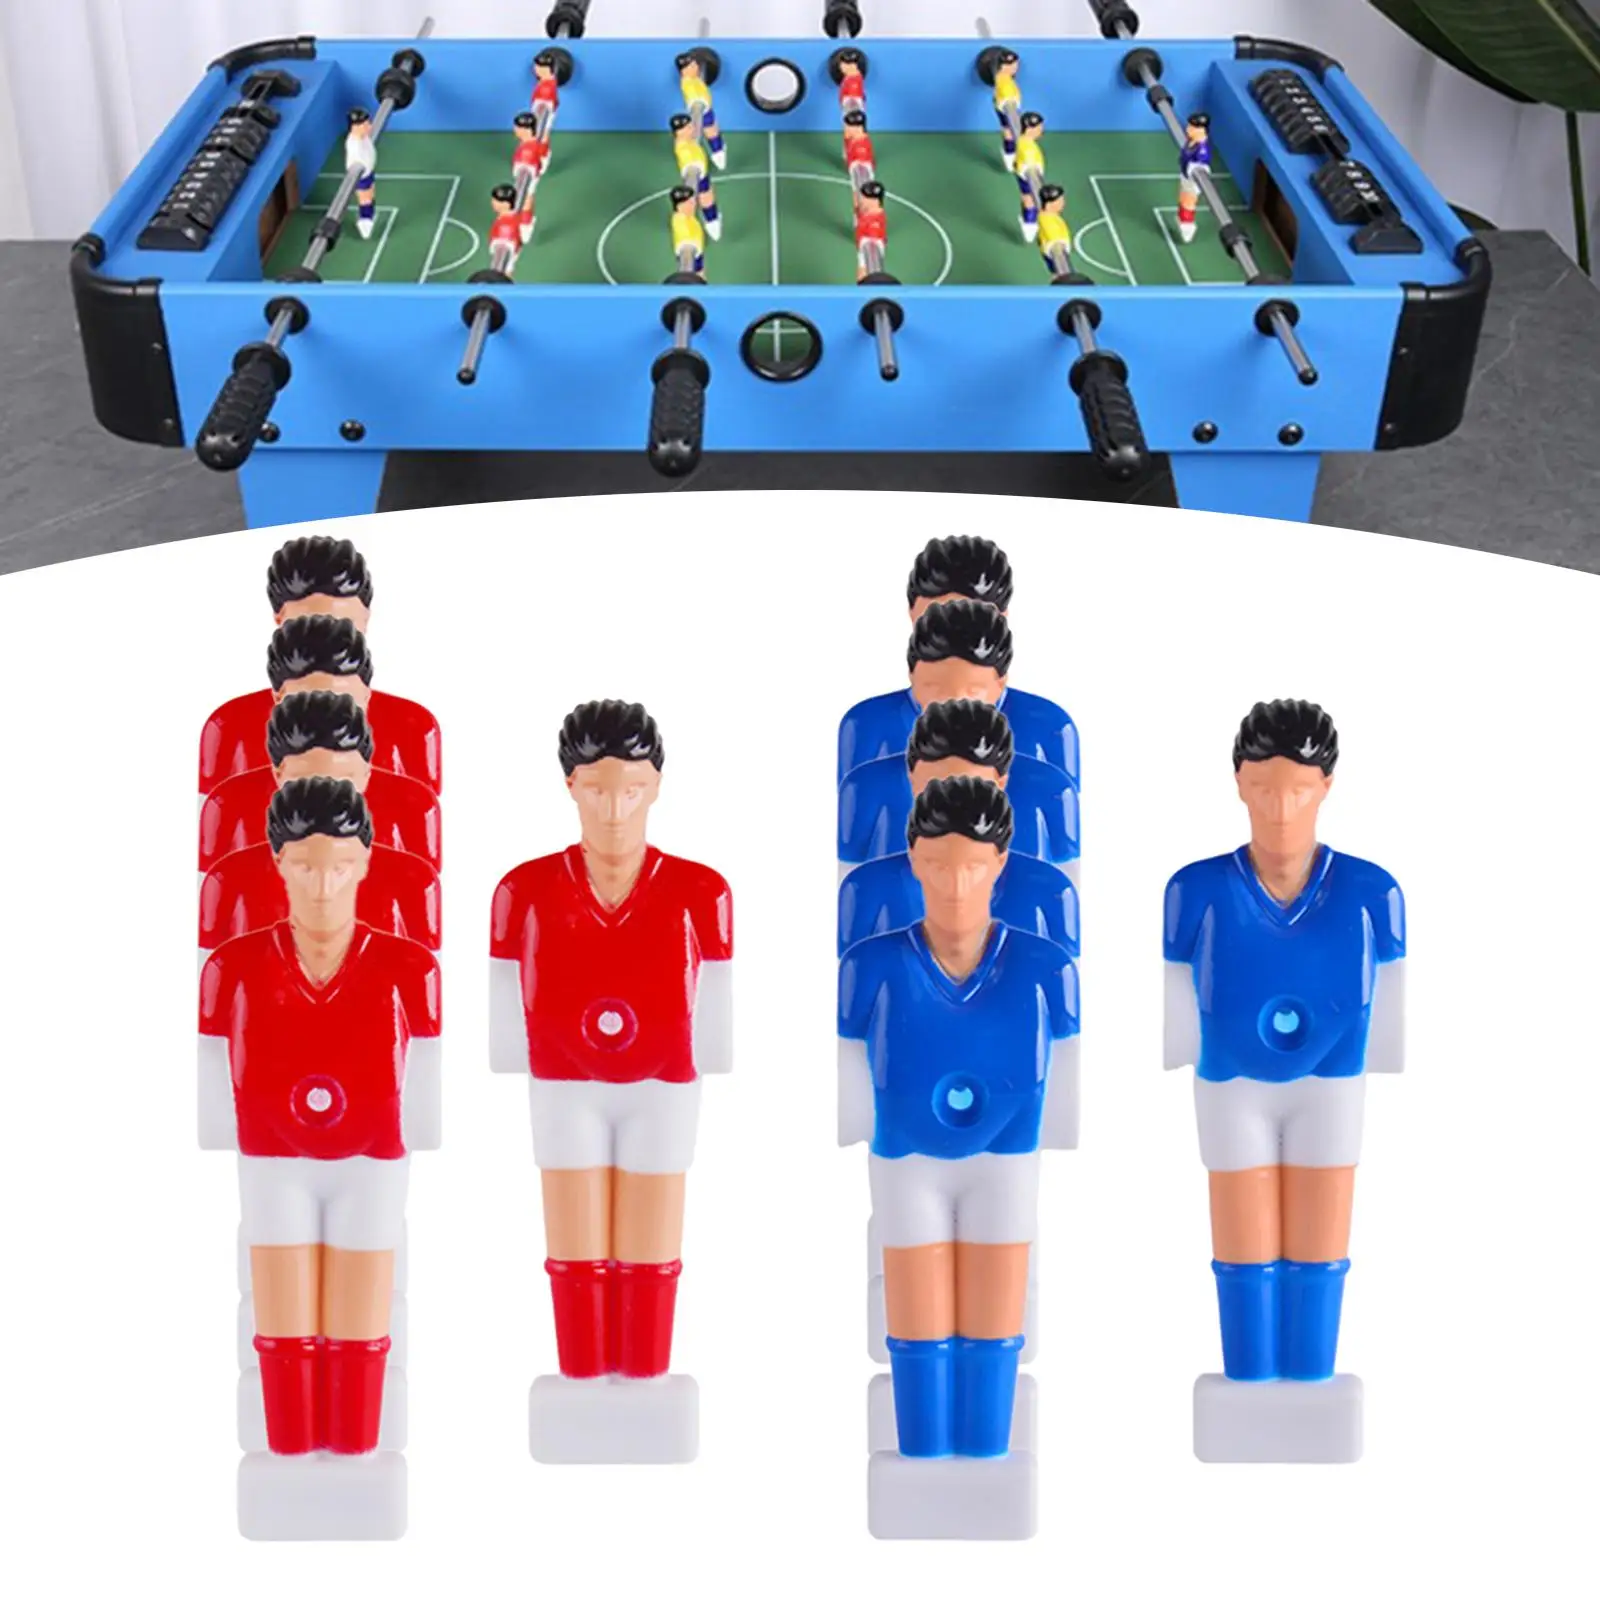 Foosball Balls Replacement 10 Replacement Parts Foosball Parts 5+5 Blue